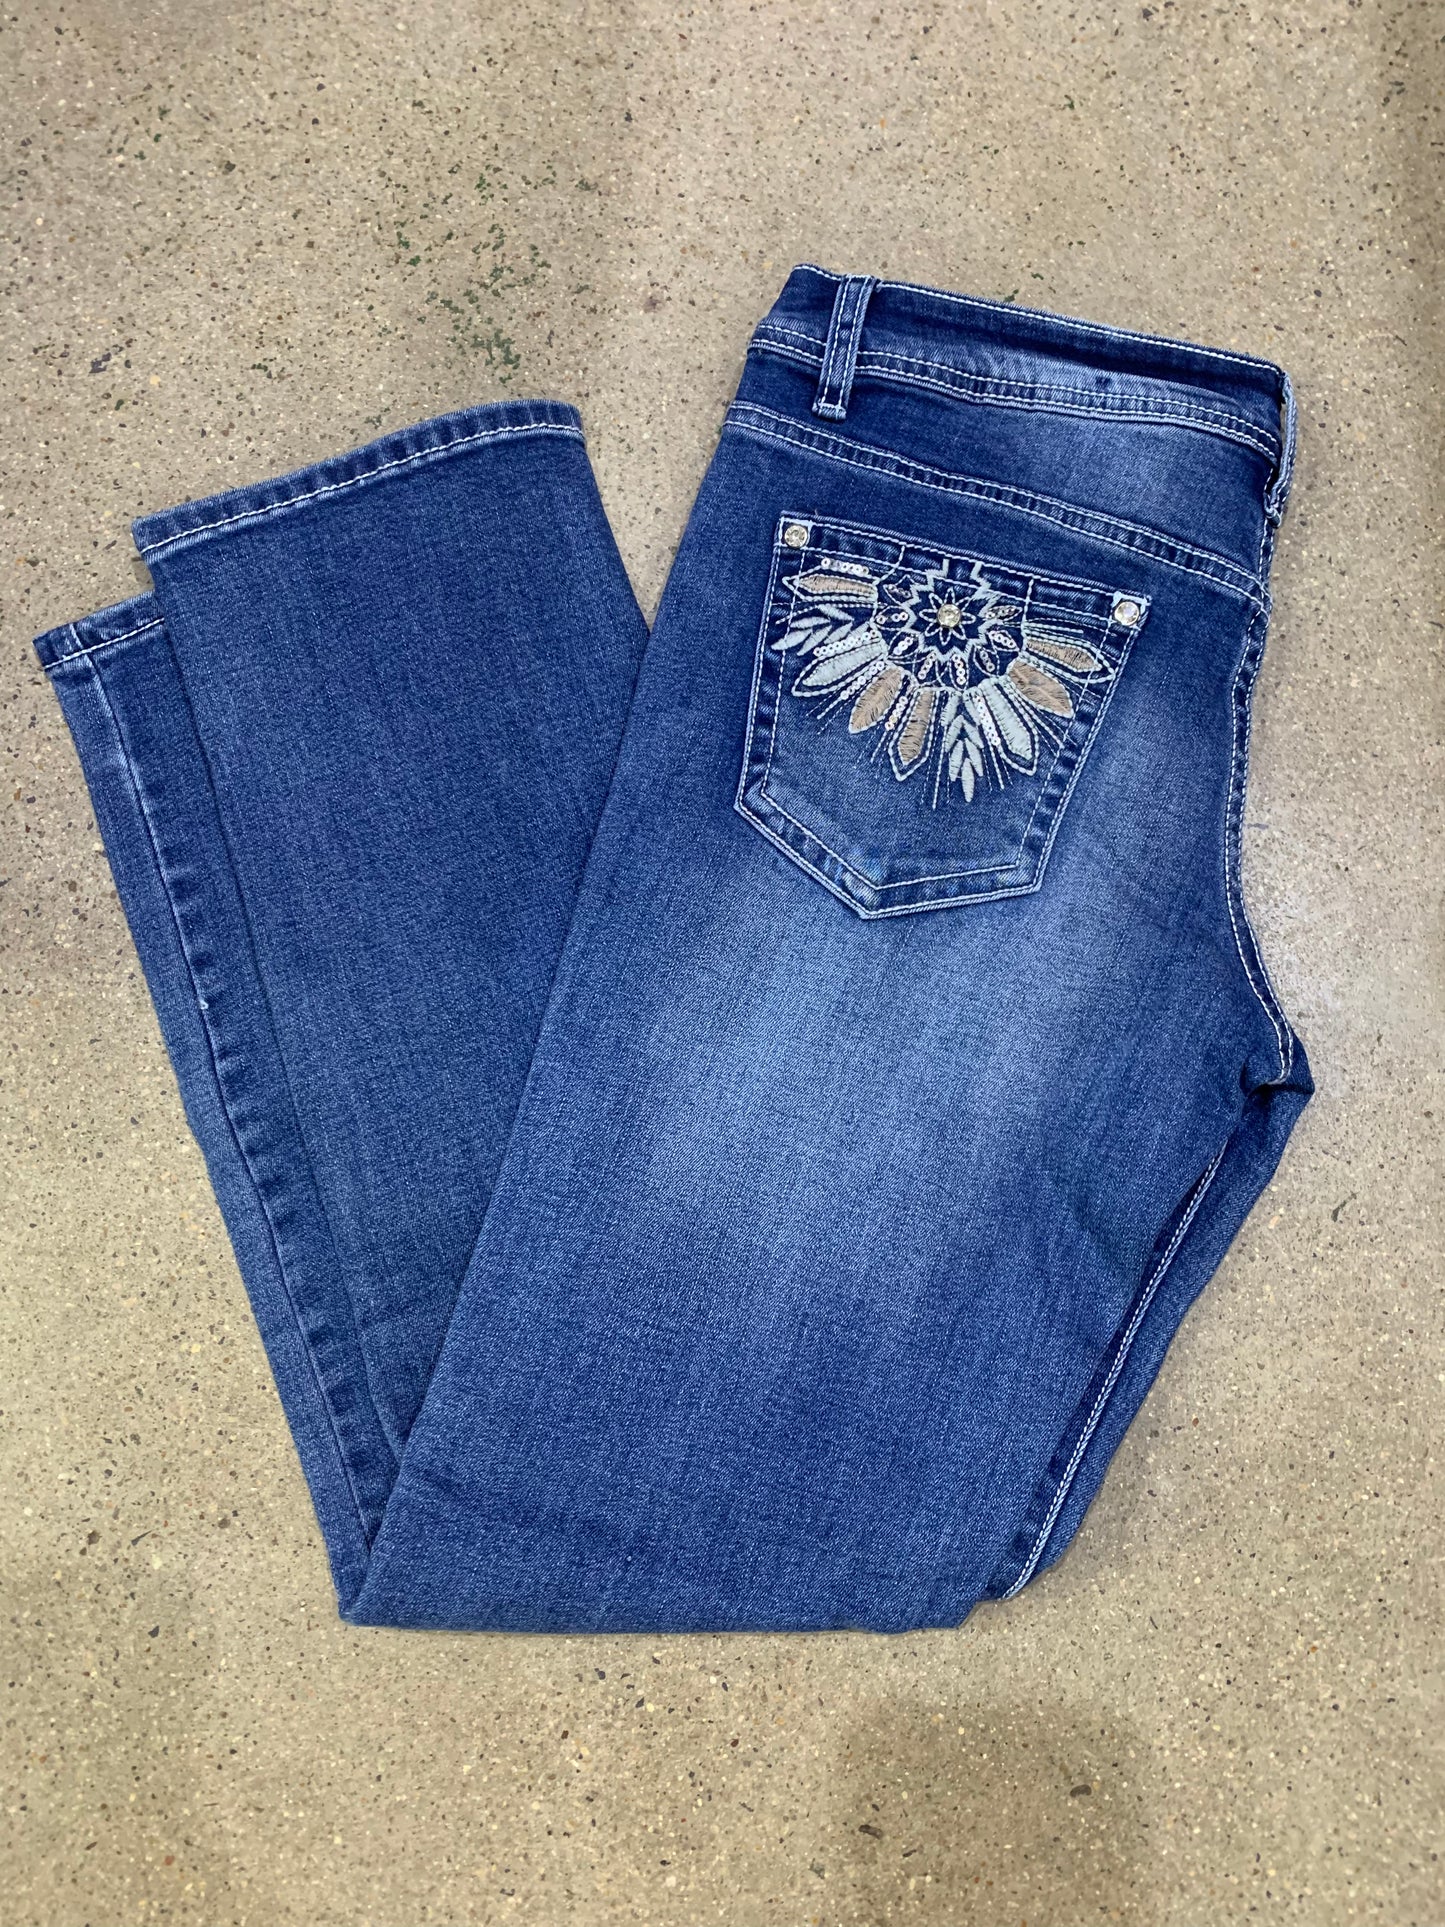 Outback Cassidy Bling Girls Jeans - ON SALE